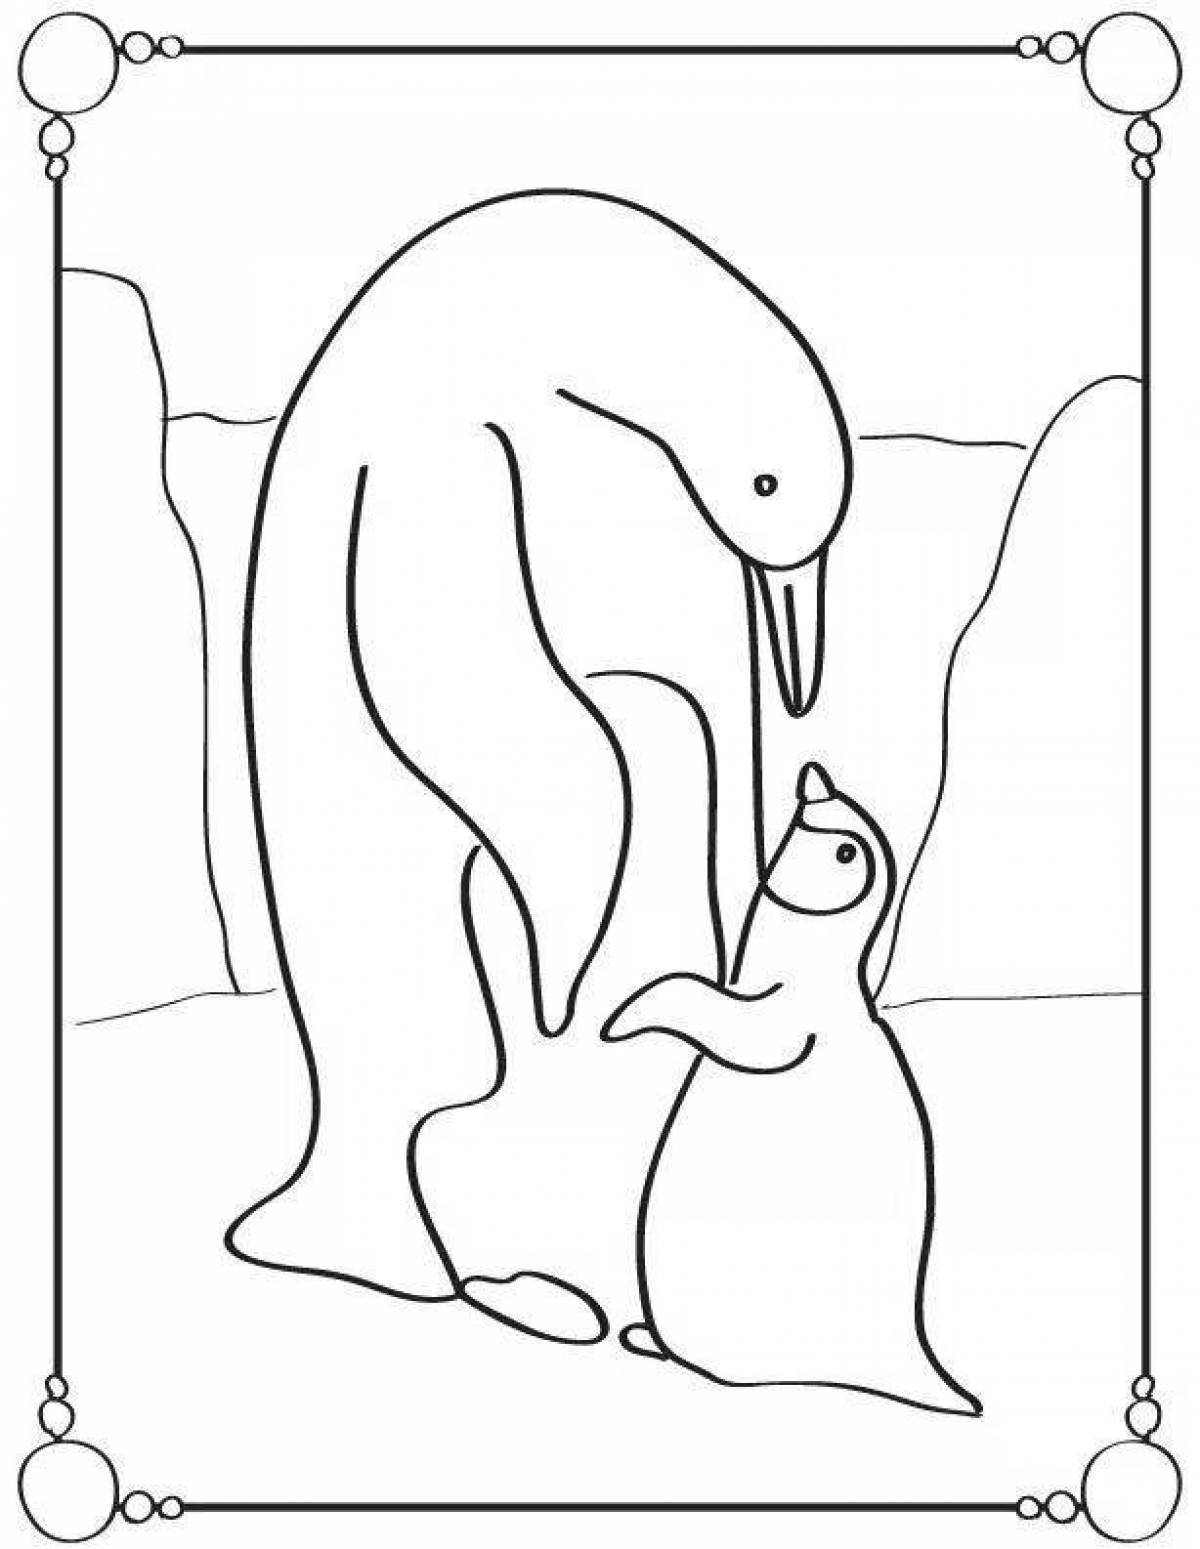 Coloring page exquisite penguin on ice